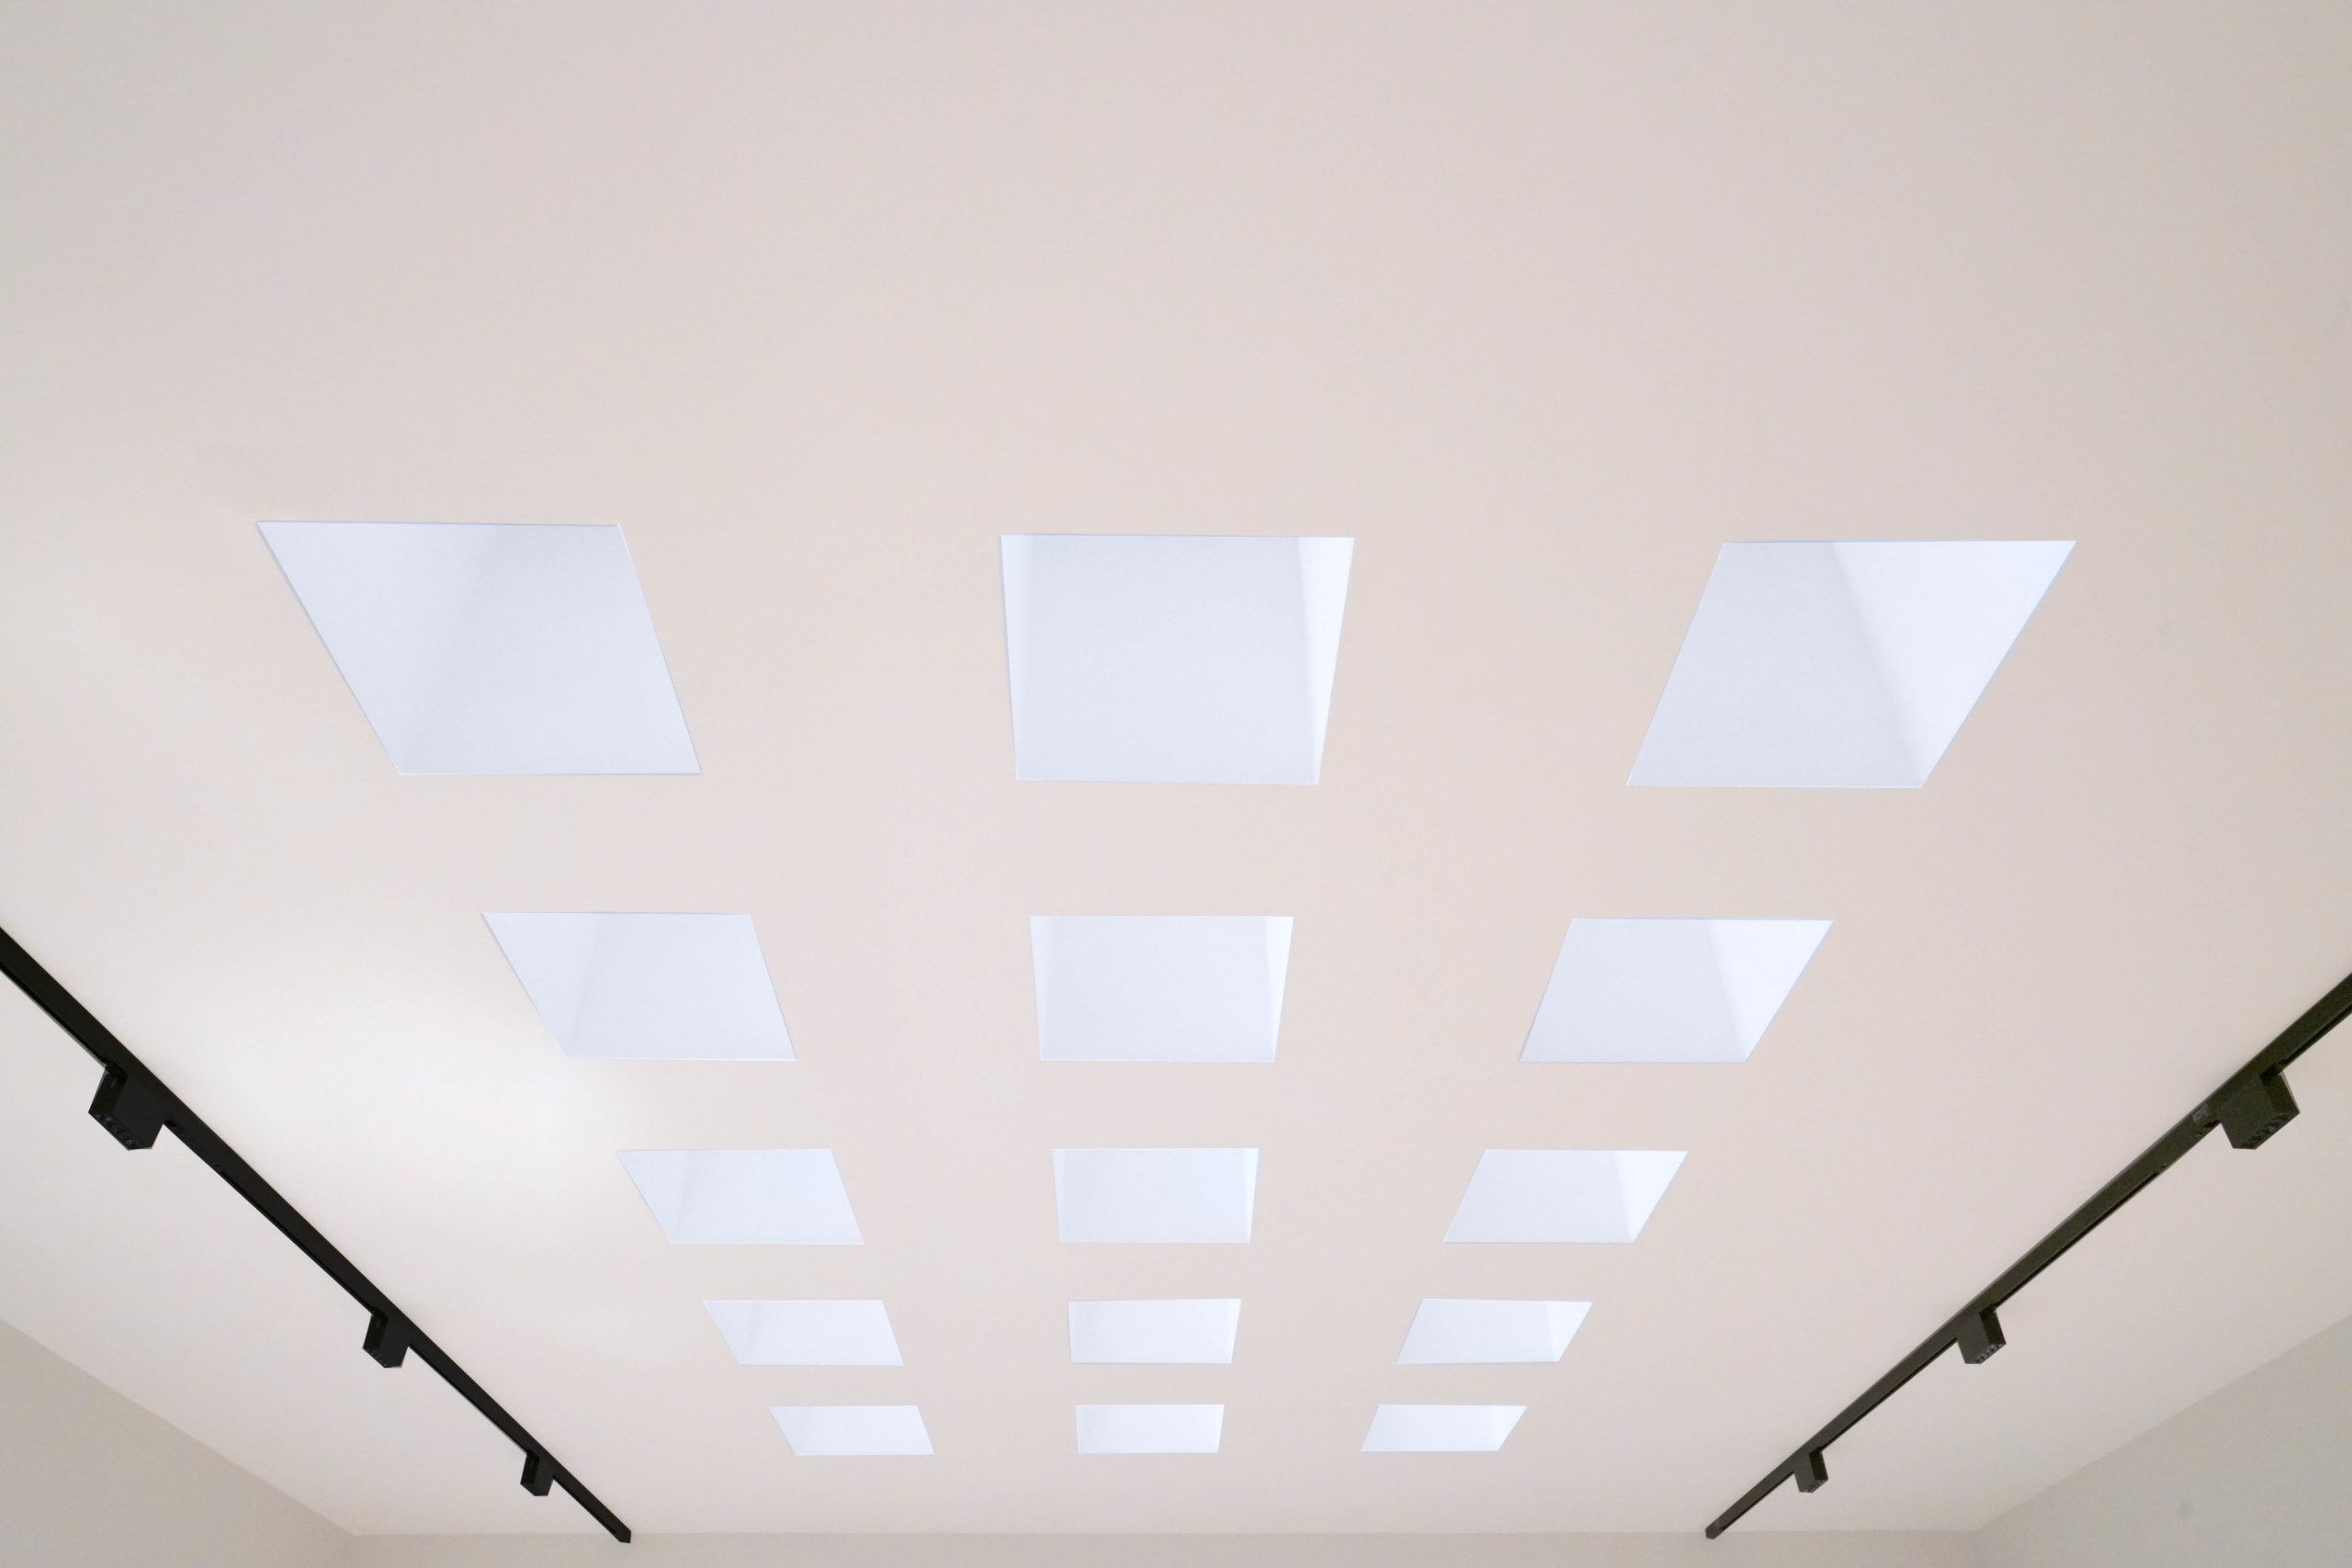 Recir - Civil Engineering and General Construction - Floor construction with a skylight